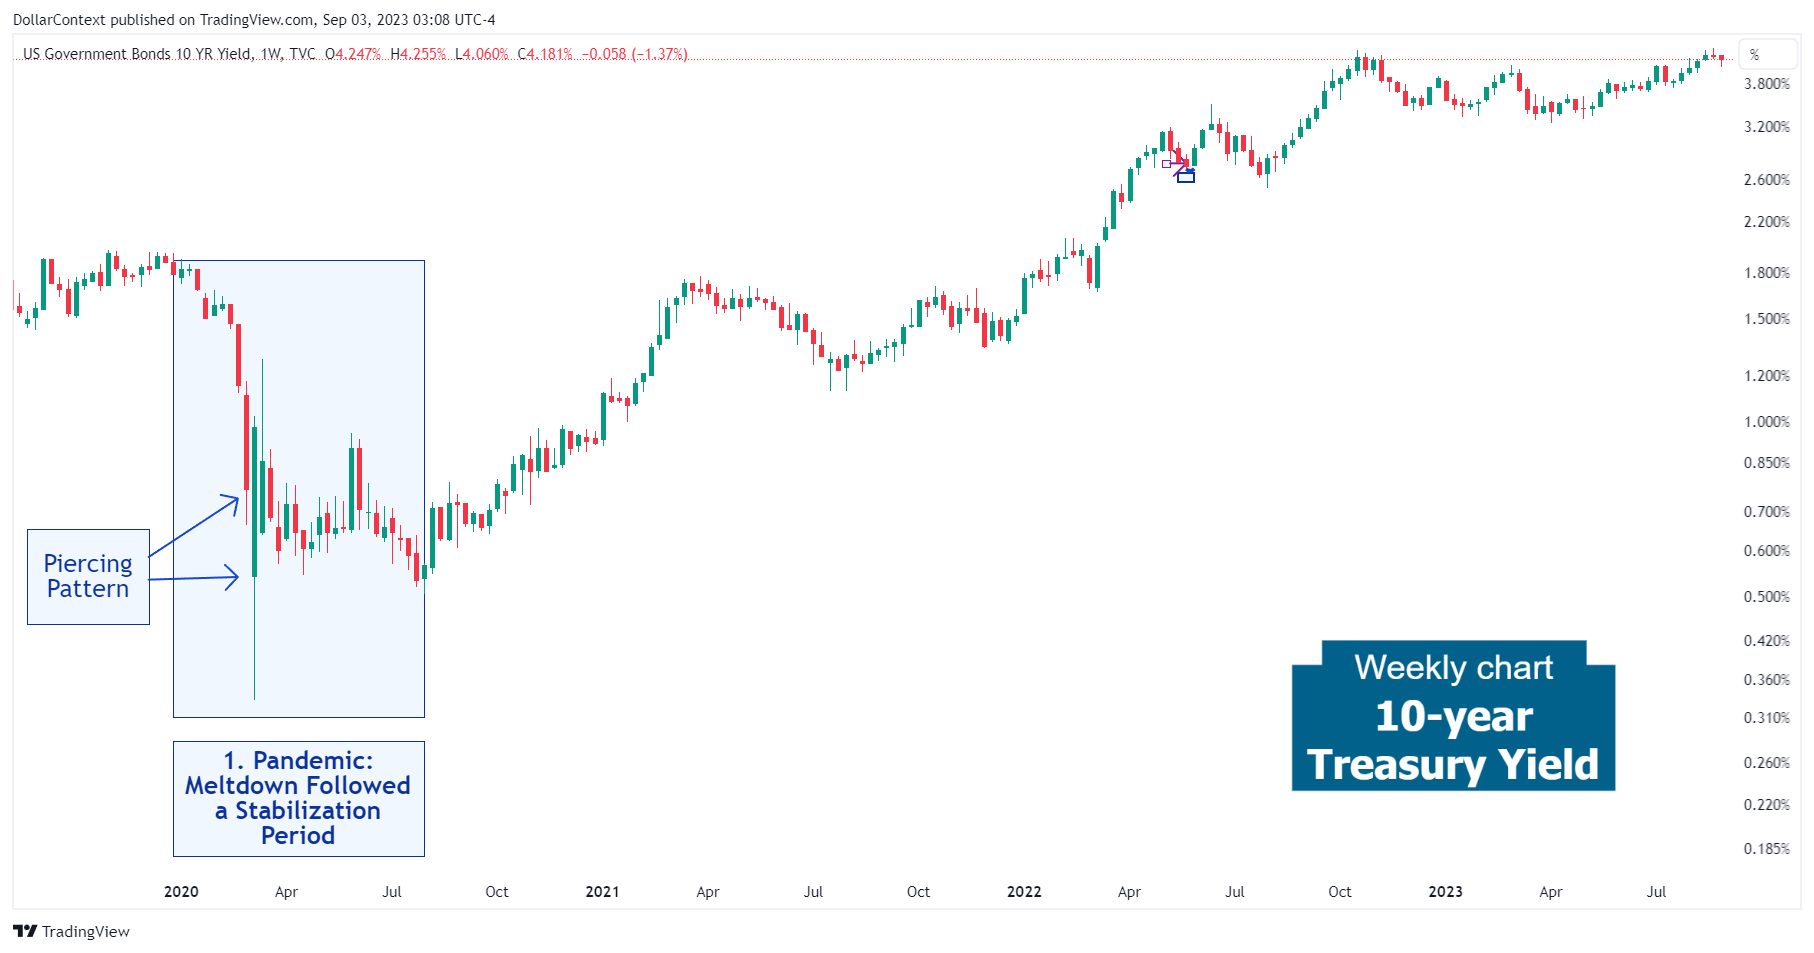 10-Year Treasury Yield: The Volatile Market in Early 2020 (Weekly Chart)